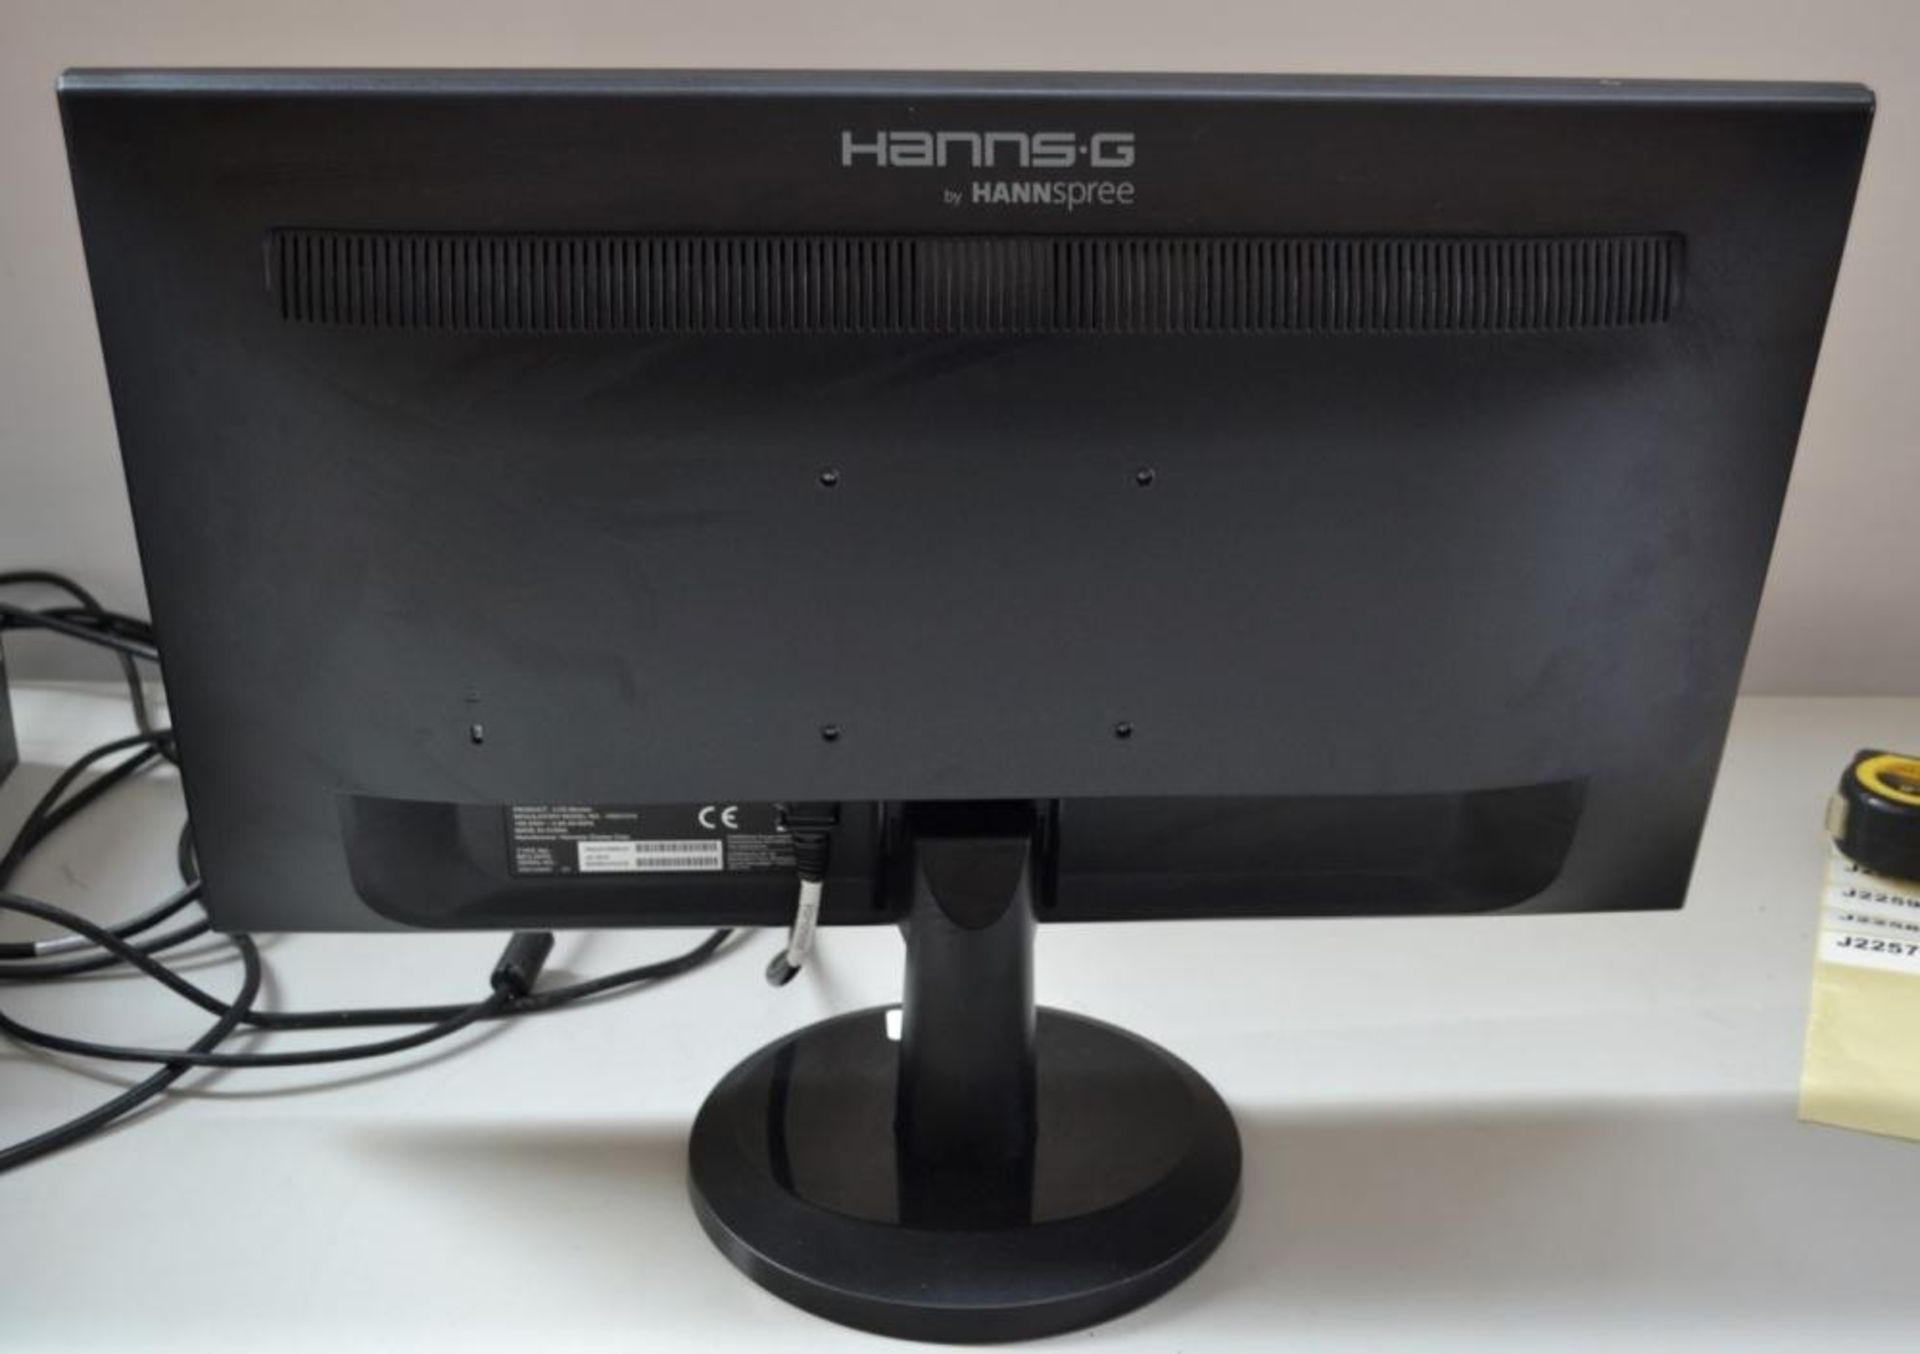 1 x Hanns.G HS243HPB - 24 Inch LED PC Monitor - Ref J2256 - CL394 - Location: Altrincham WA14 - - Image 3 of 3